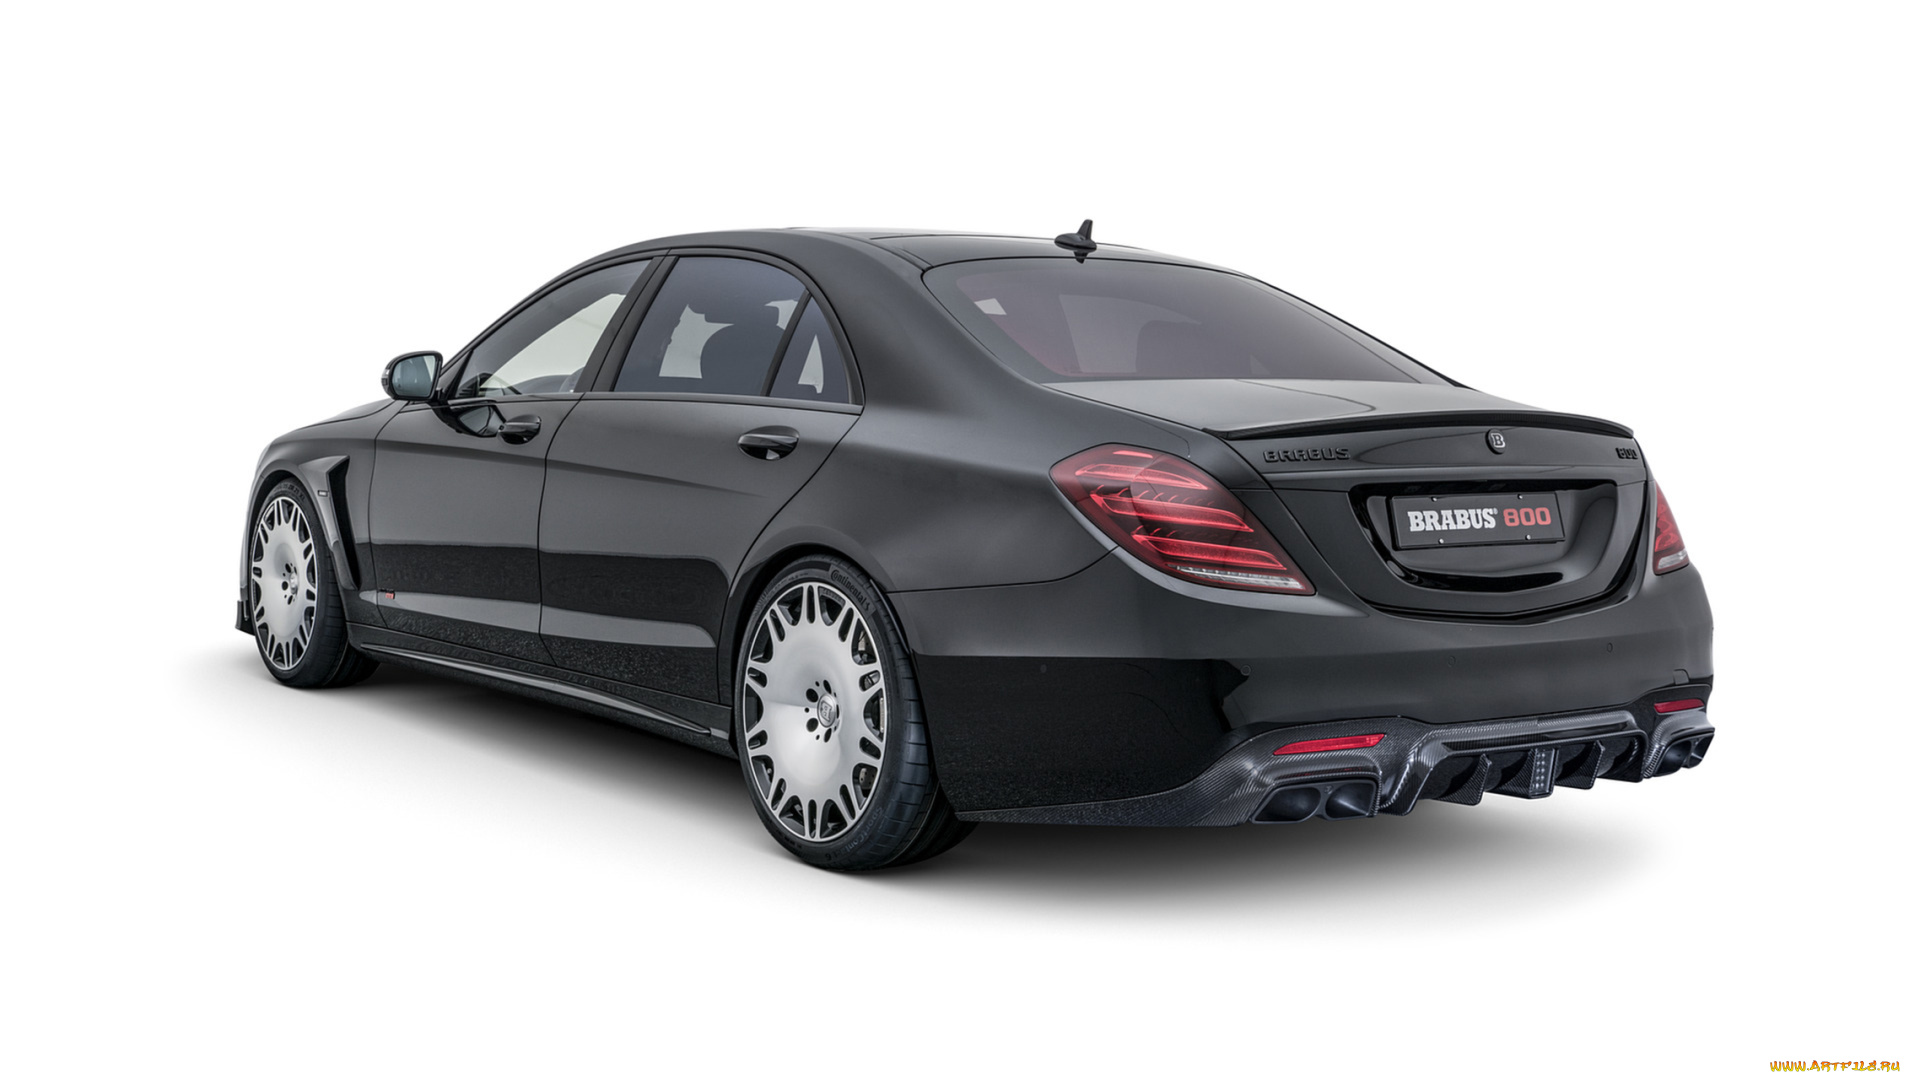 brabus, 800, based, on, mercedes-benz, amg, s-63, 4matic, , 2018, автомобили, brabus, 800, mercedes-benz, based, 4matic, amg, s-63, 2018